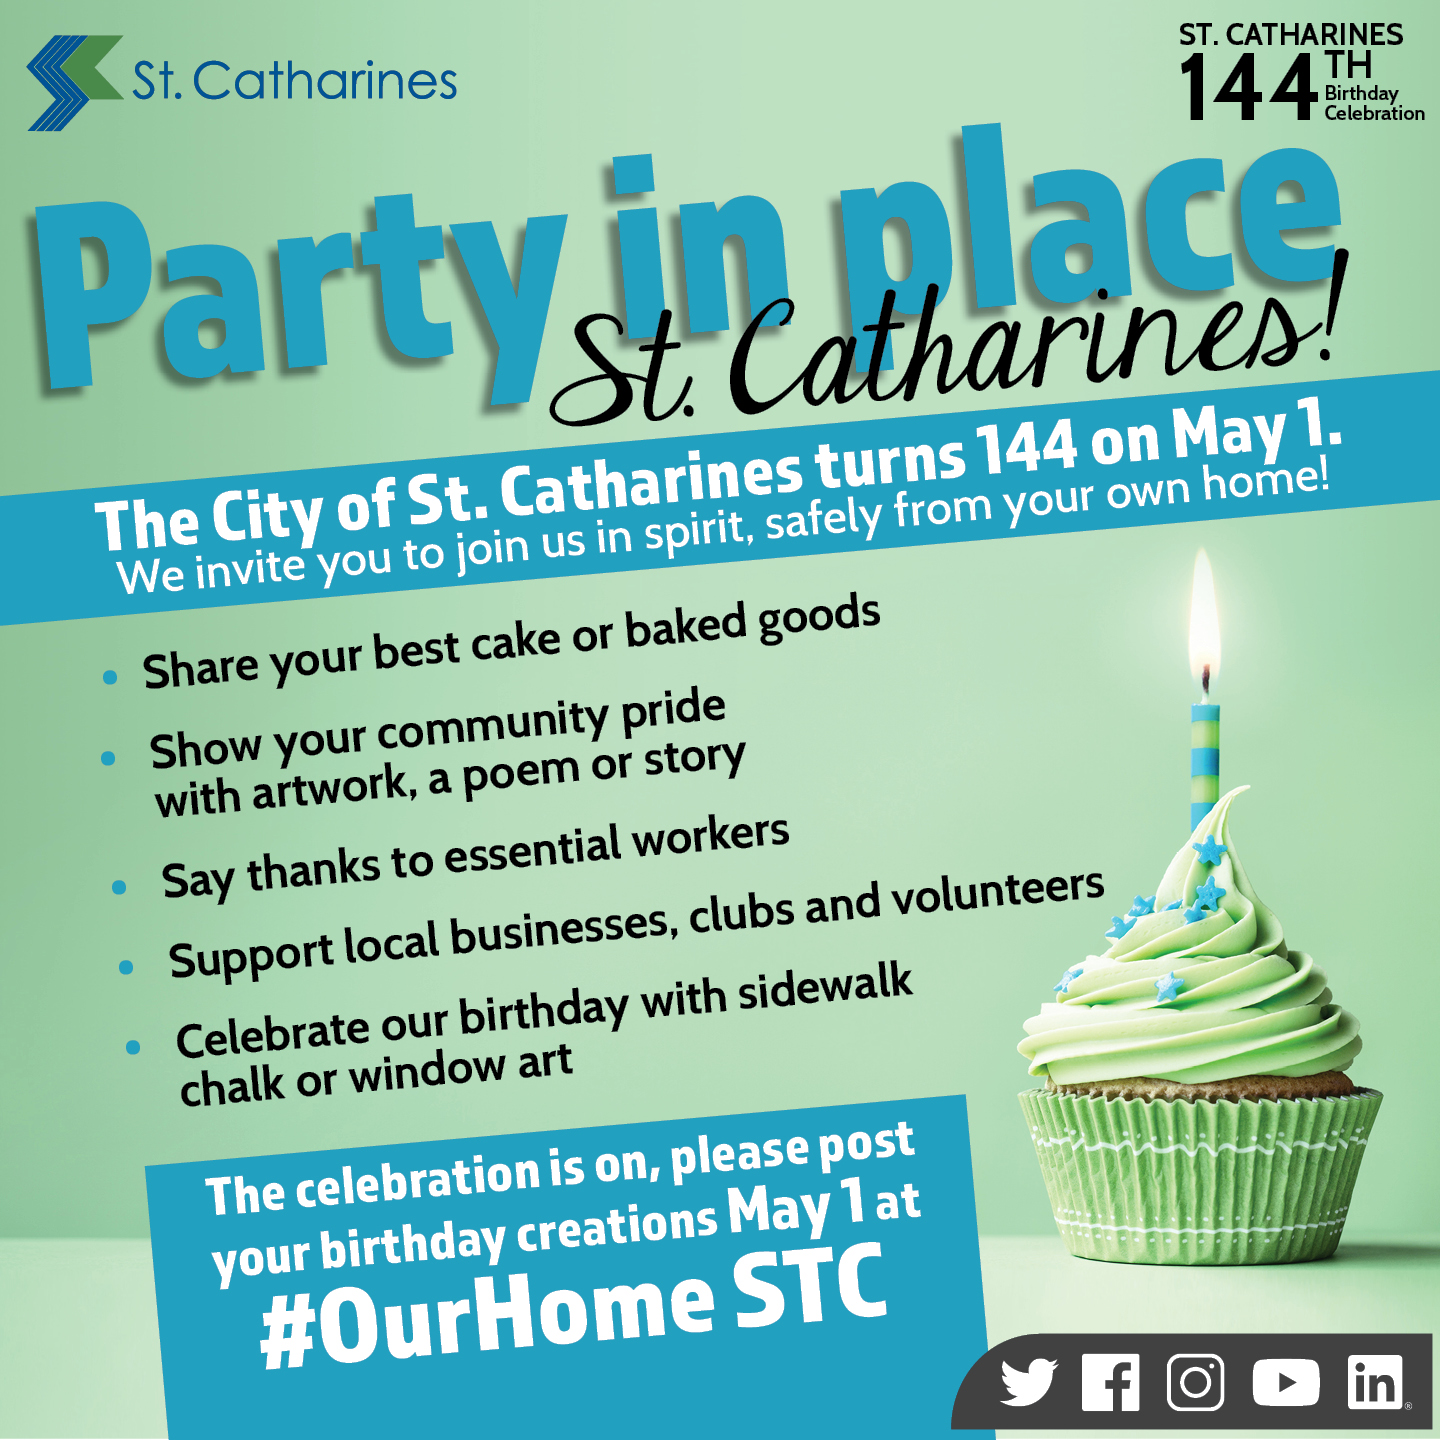 Party in place for the City of St. Catharines' 144th birthday